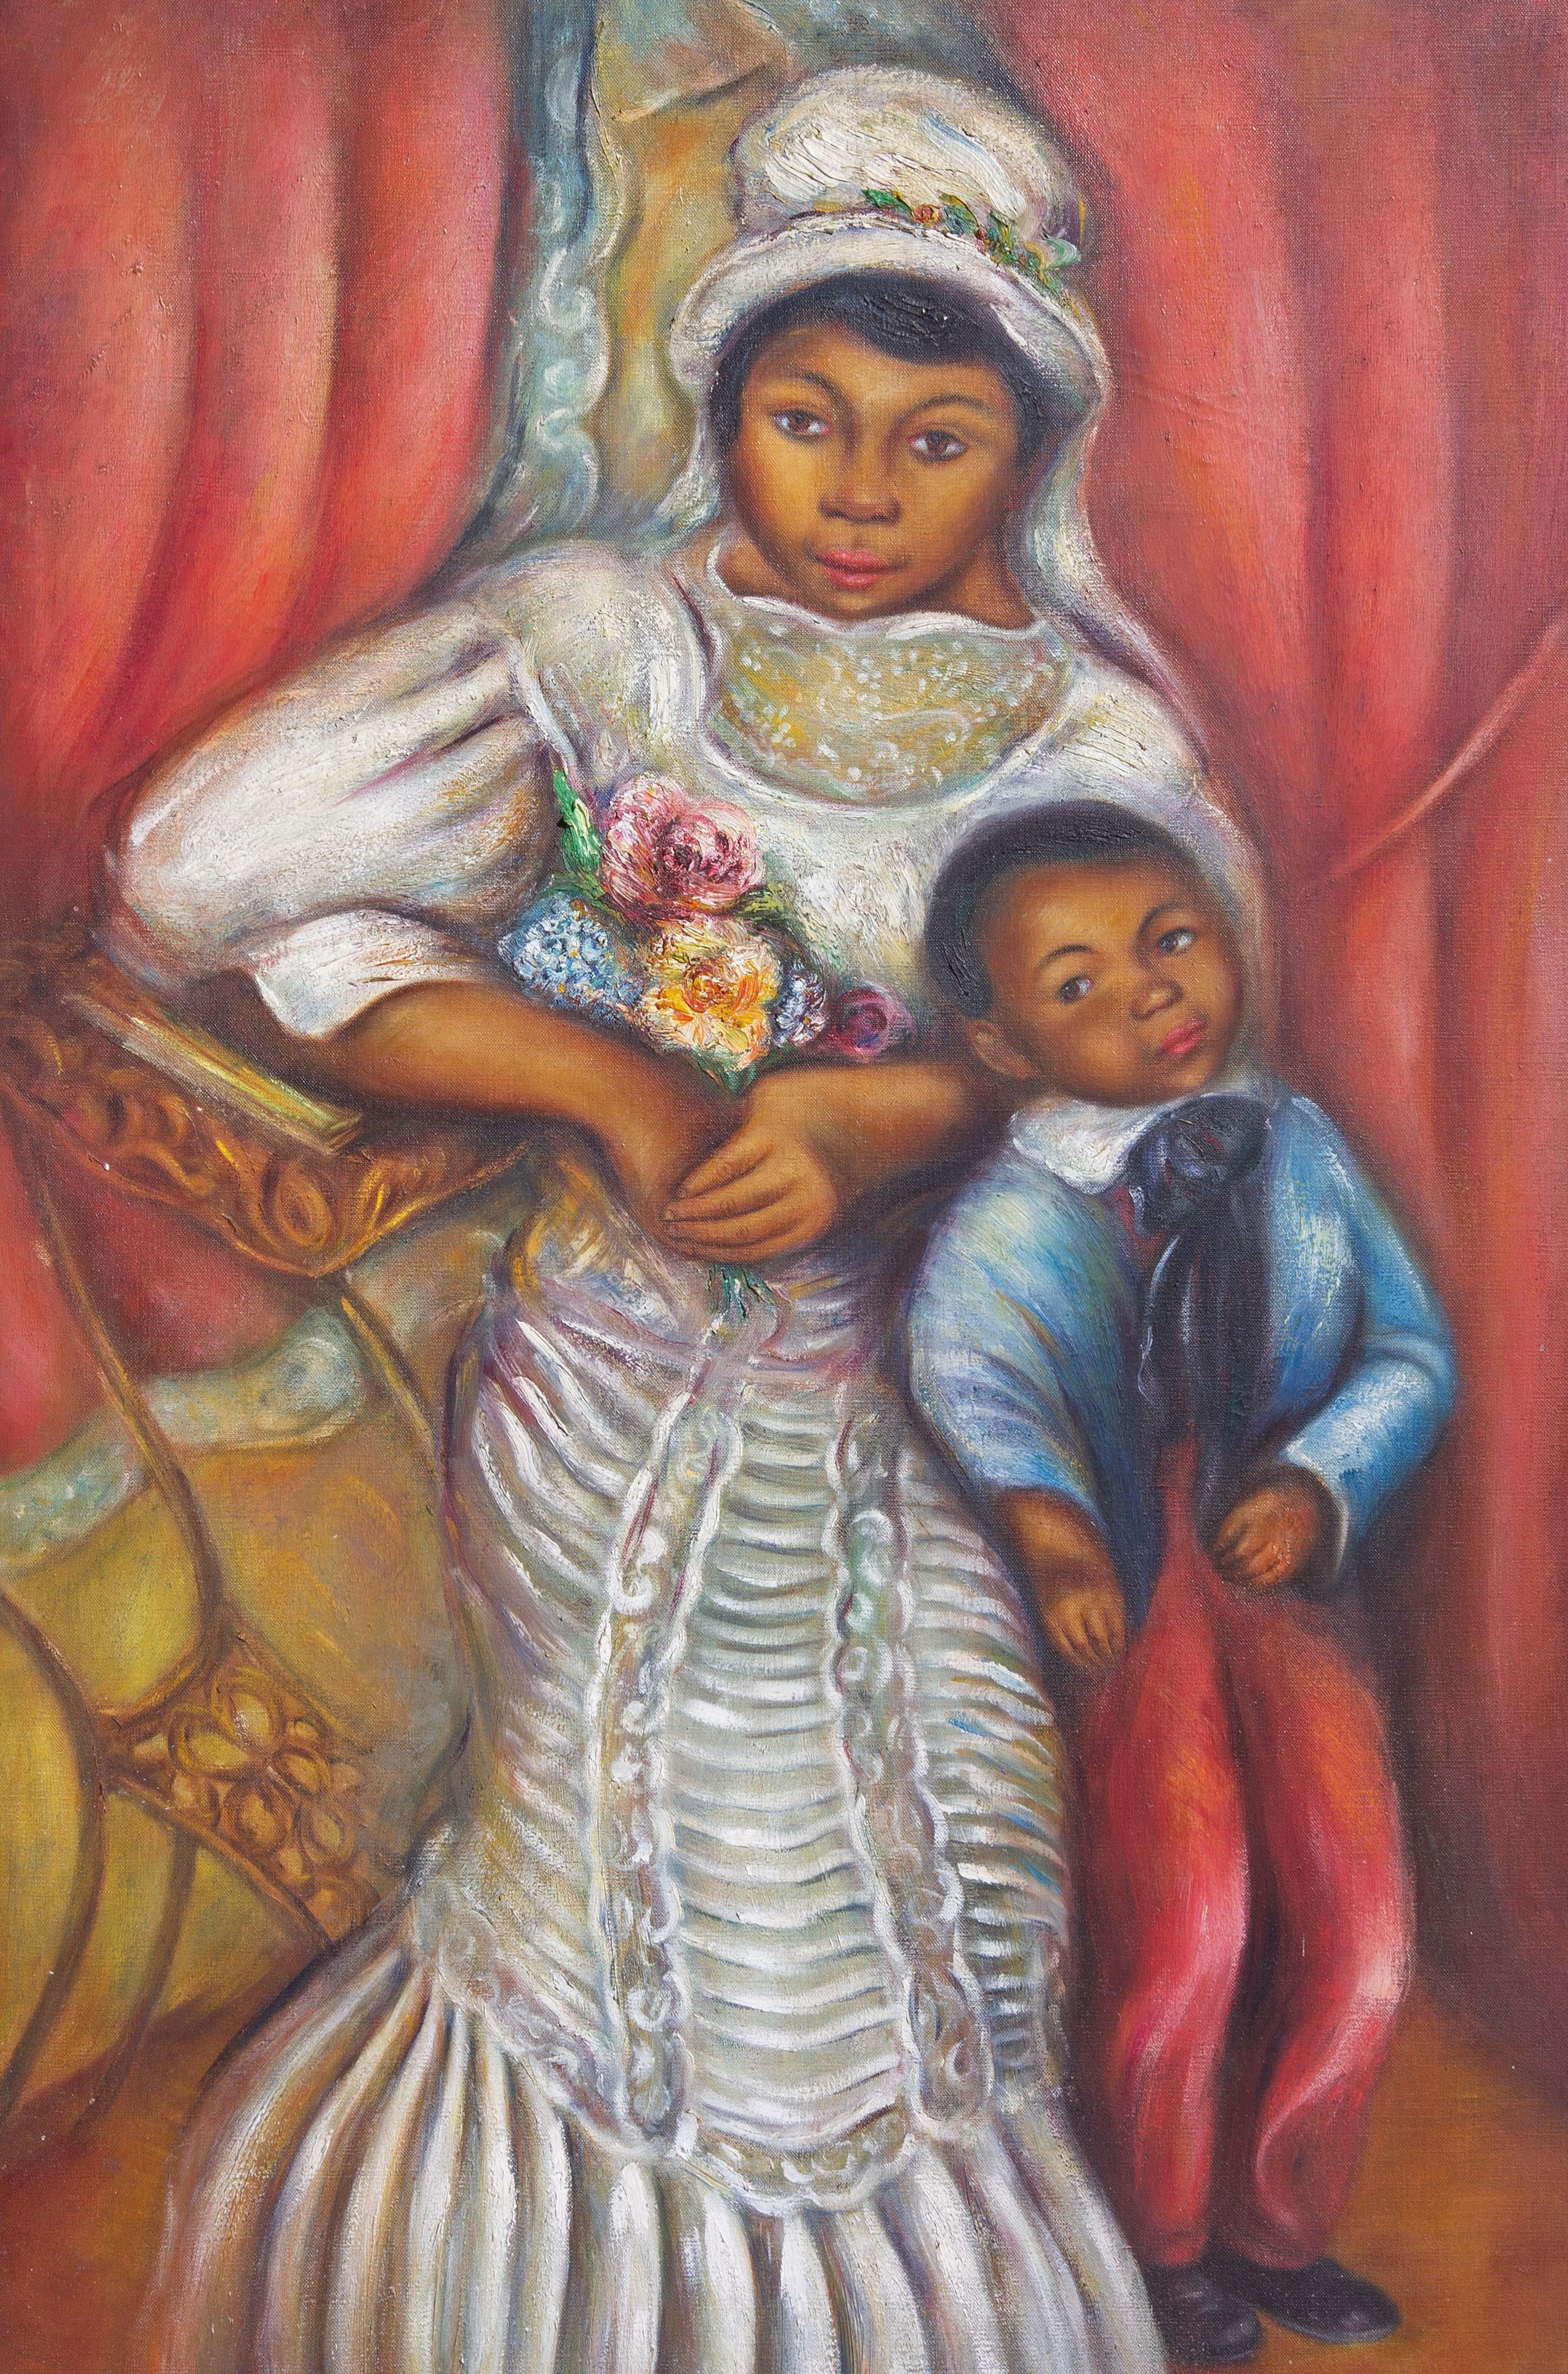 Fashionably dressed African American mother and child by Peggy Dodds (1900-1987). Large oil on canvas. Circa 1940's. Unframed.

Peggy Dodds lived in a home in the 1940's in Paterson, New Jersey and used a neighbors detached garage as a studio. The